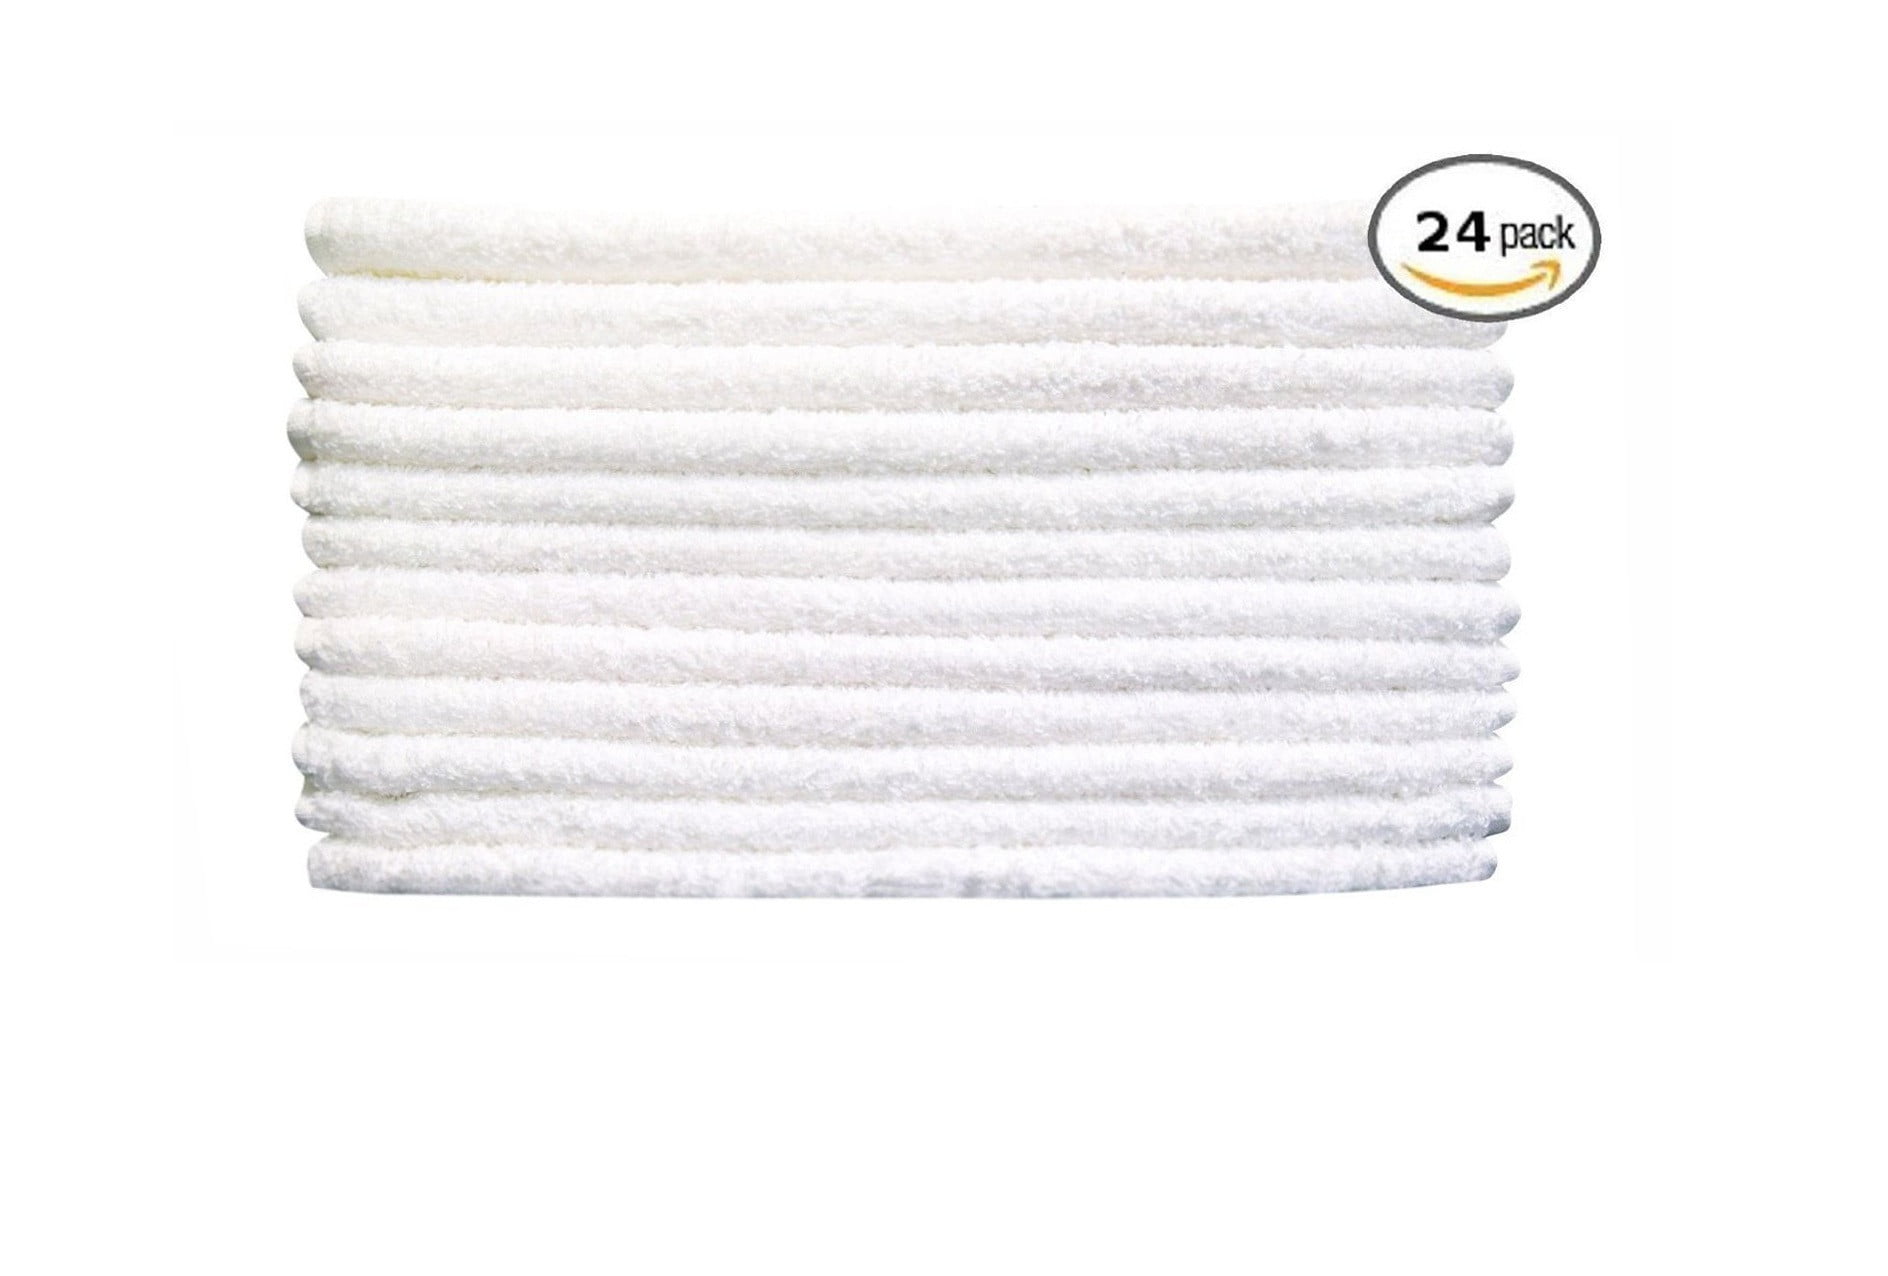 12 Pack Premium Cotton Washcloth Facecloth Set 12 x 12 Inches Makeup Remover 